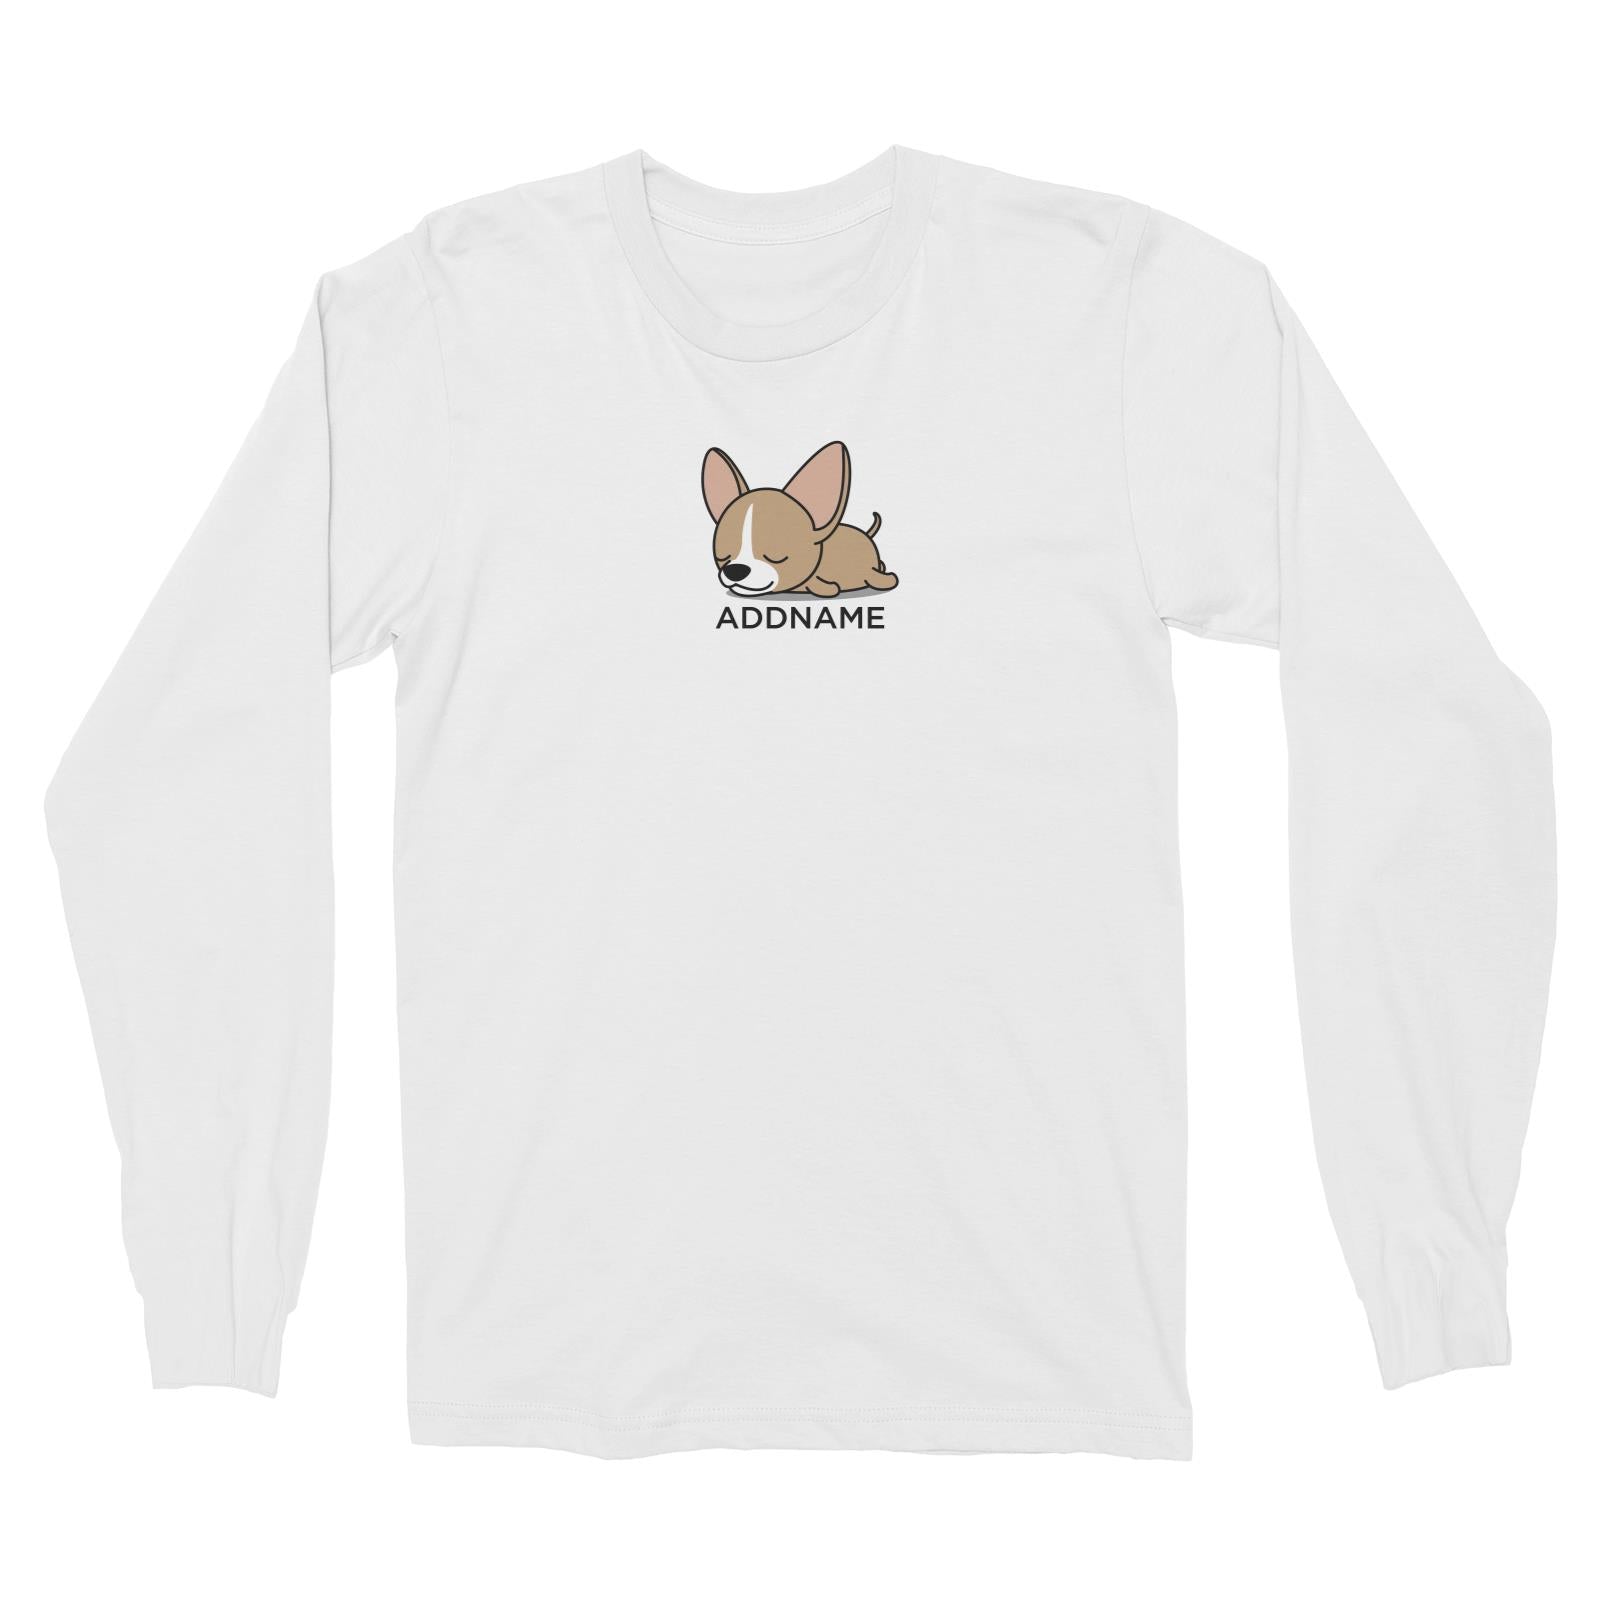 Lazy Chihuahua Dog Addname Long Sleeve Unisex T-Shirt  (FLASH DEAL)